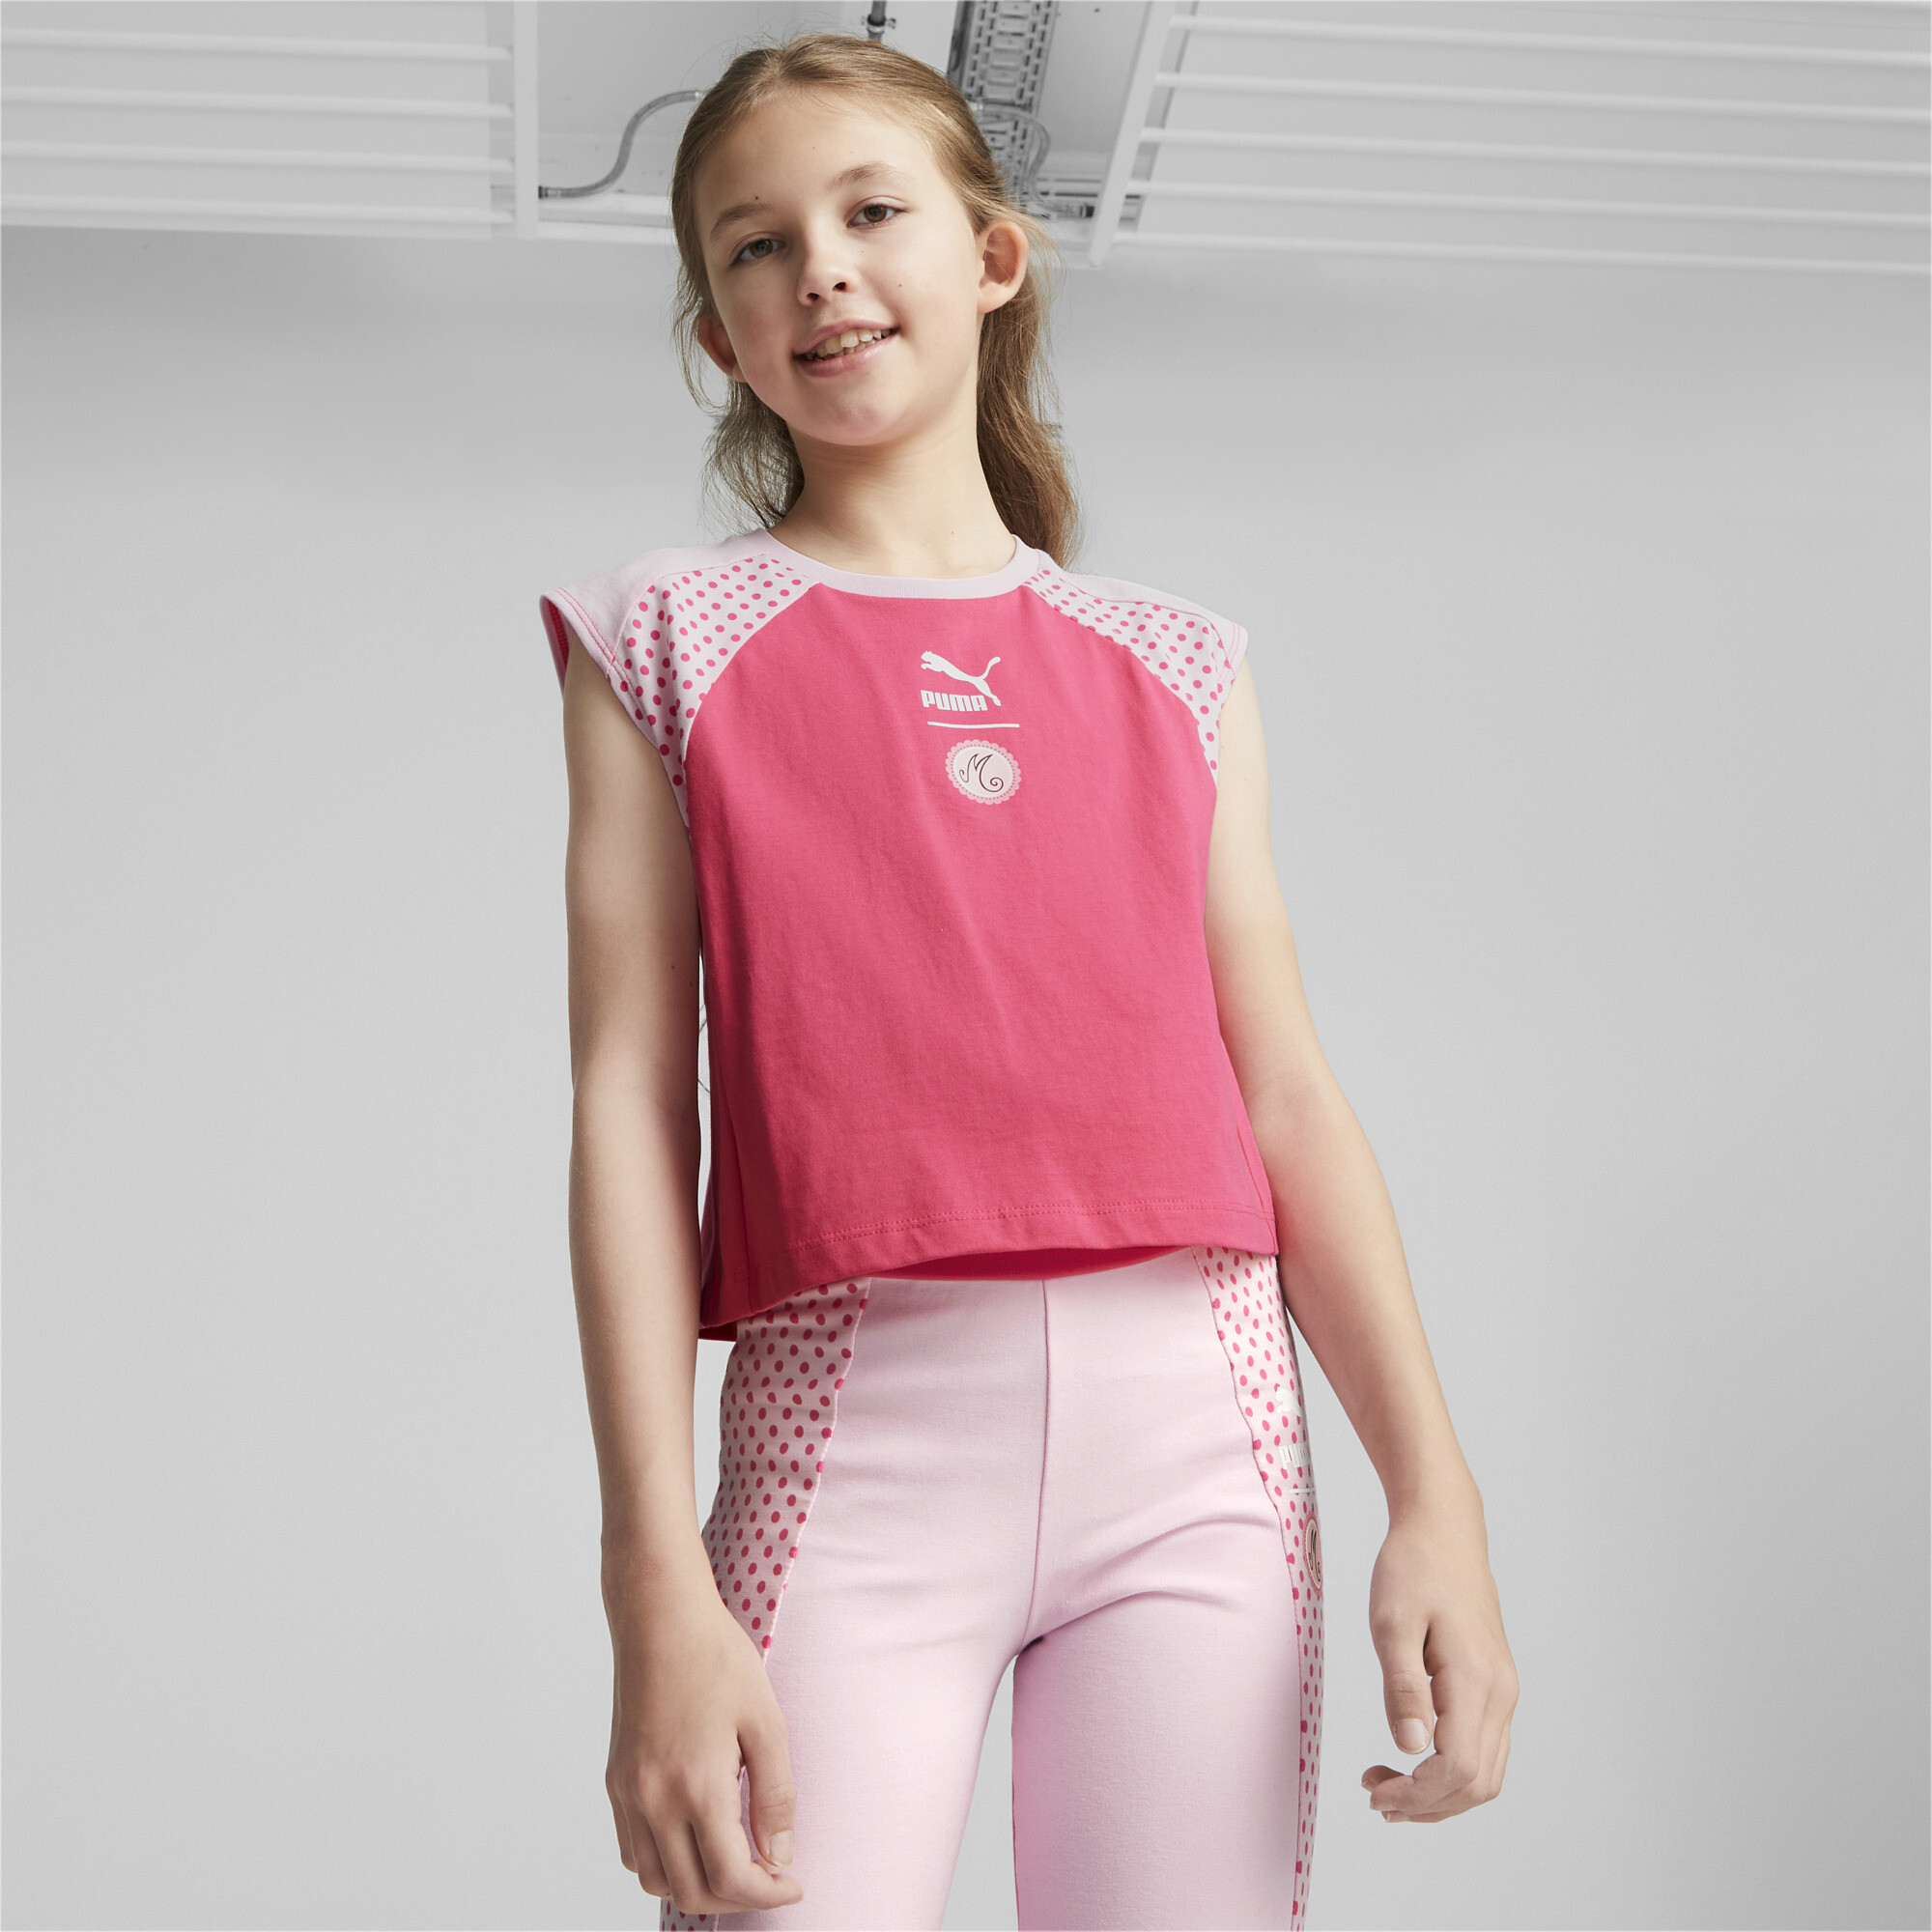 Puma X MIRACULOUS SL Tee Youth, Pink, Size 9-10Y, Clothing